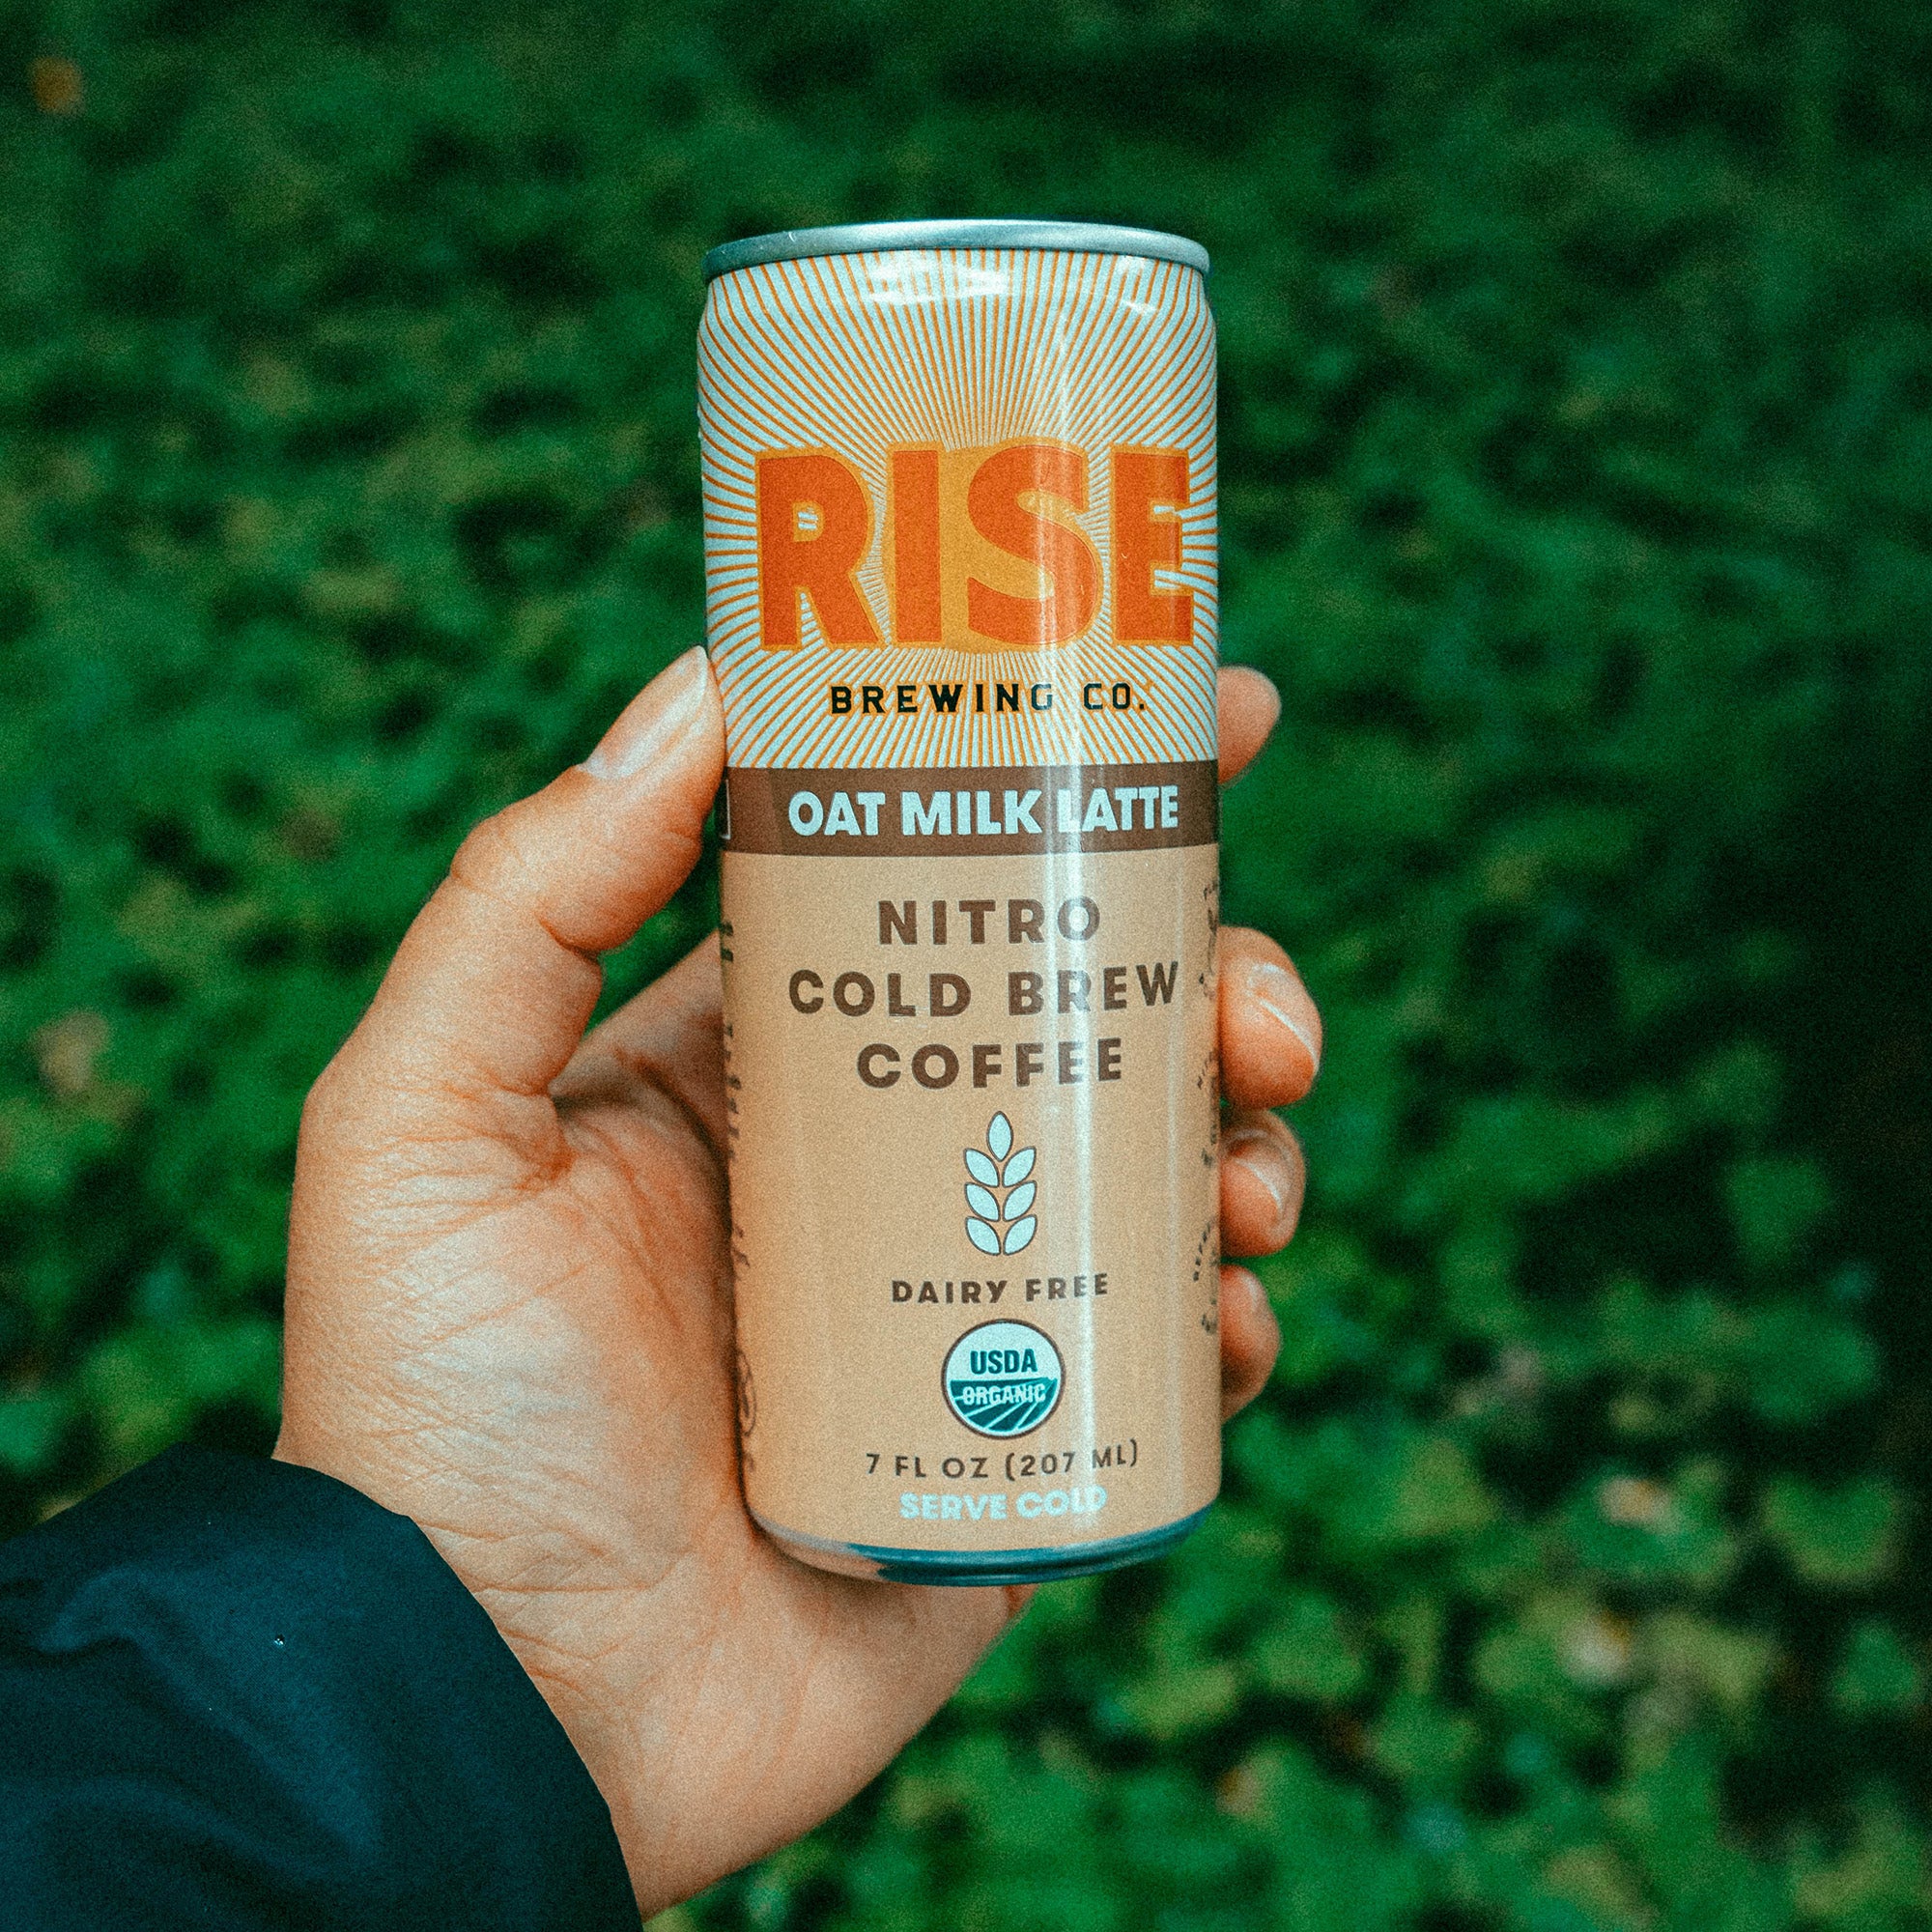 RISE Brewing Co. the first ROAR